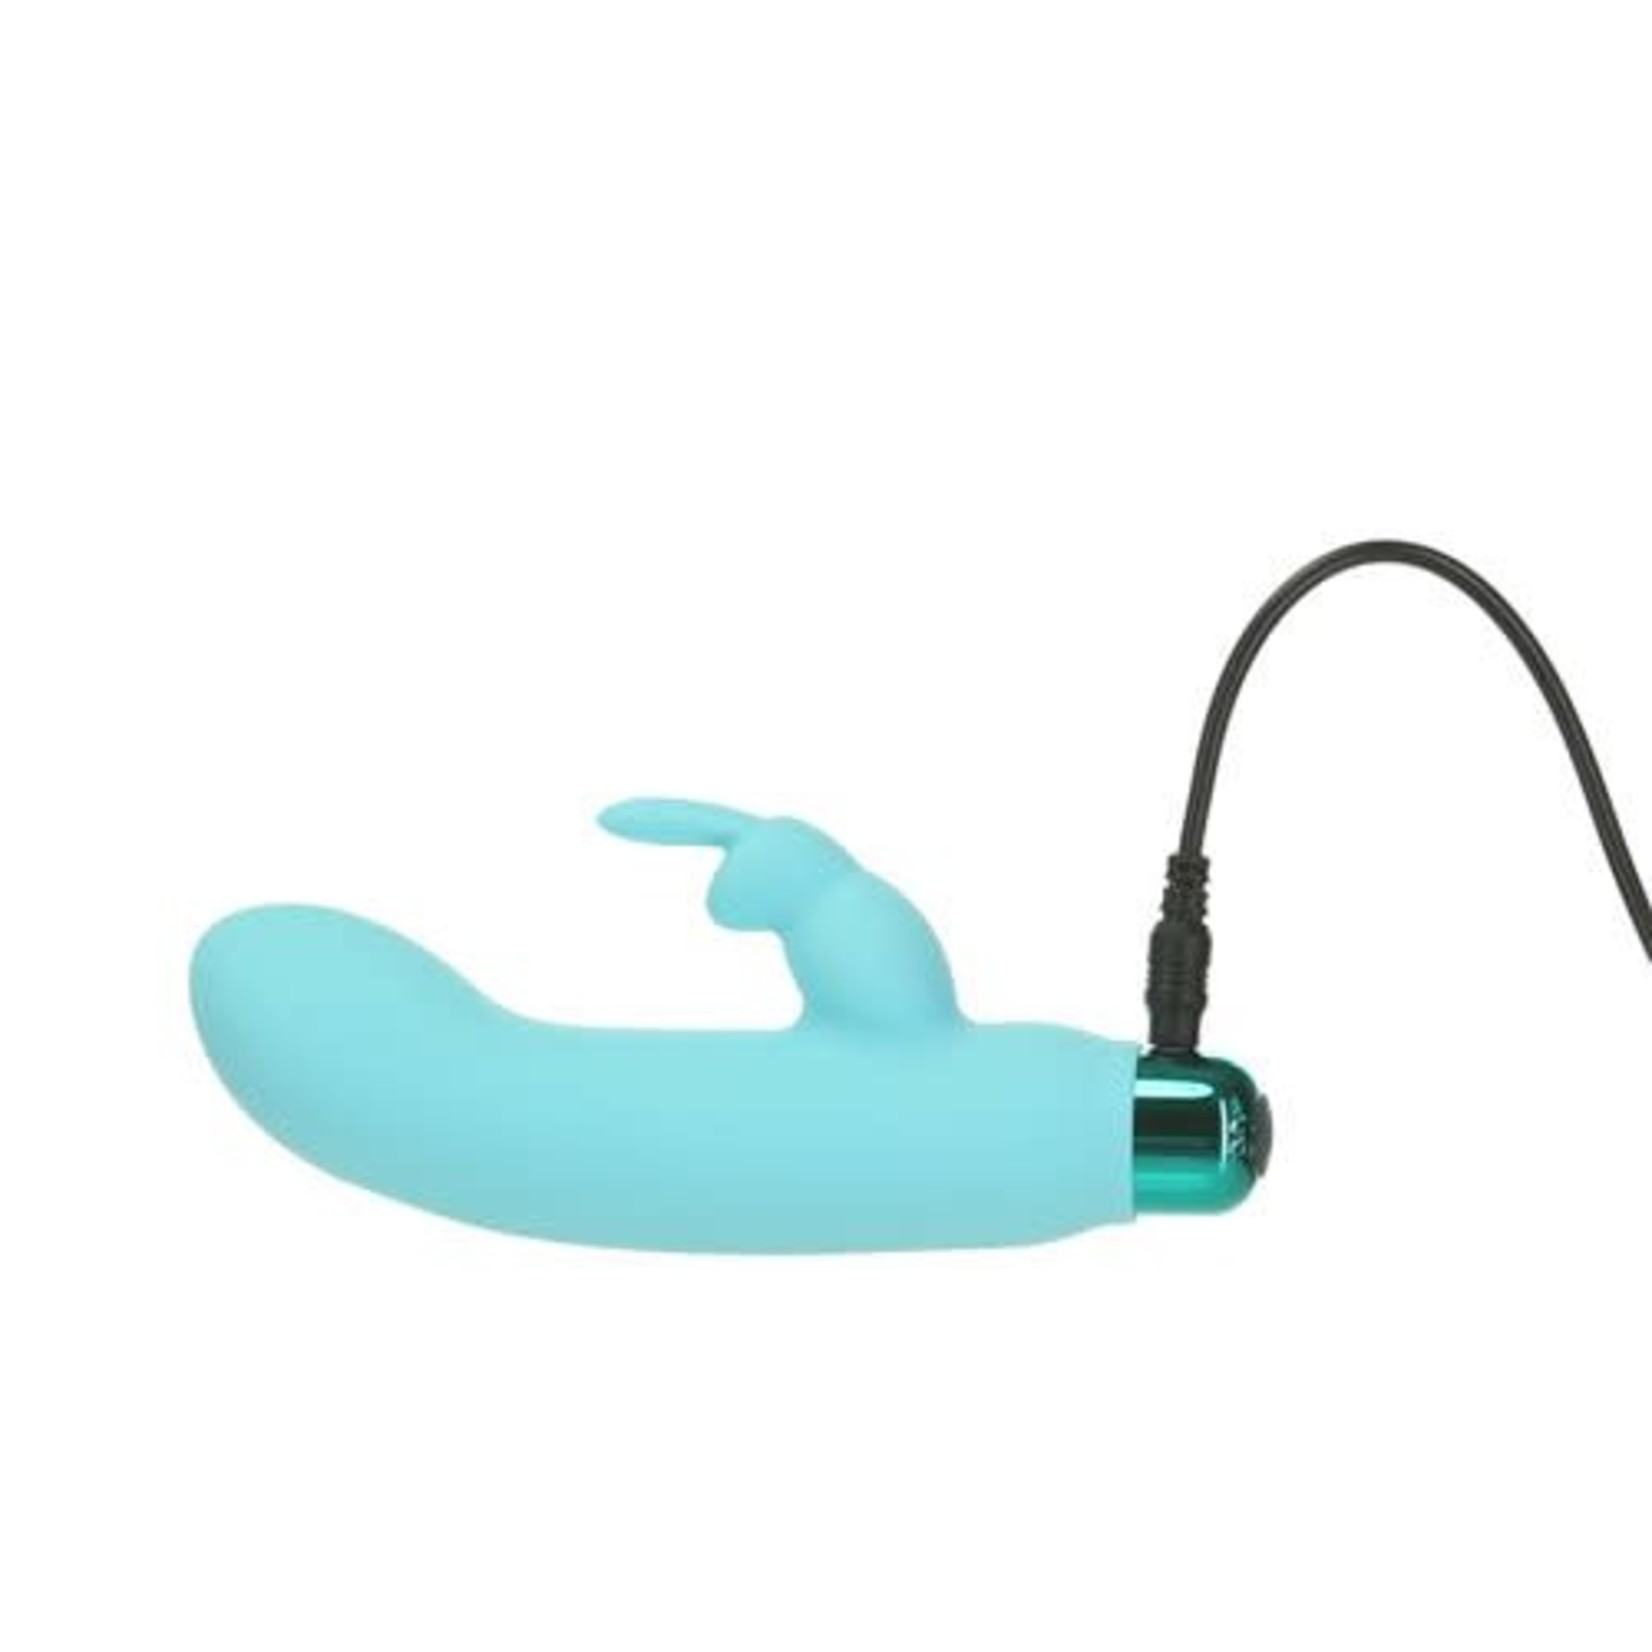 BMS - ALICE'S BUNNY - RECHARGEABLE BULLET WITH REMOVABLE RABBIT SLEEVE - TEAL